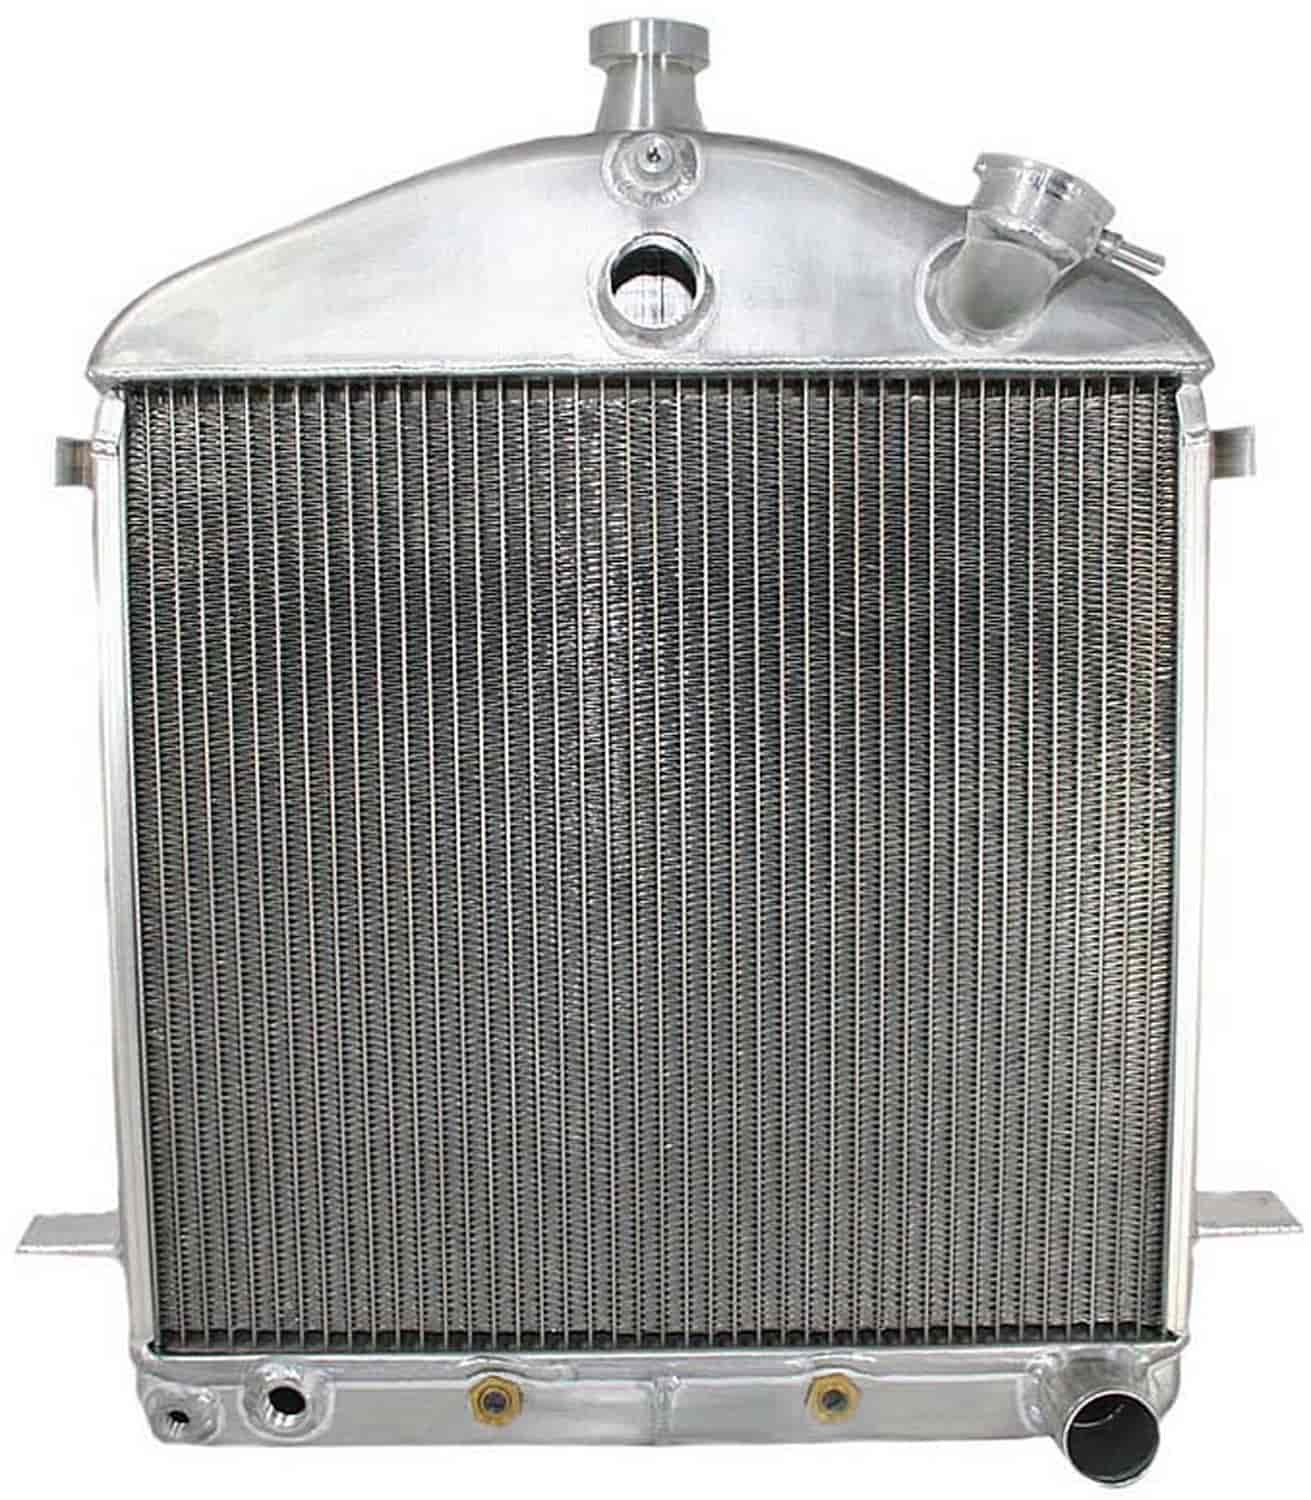 ExactFit Radiator for 1927 Model T with Early